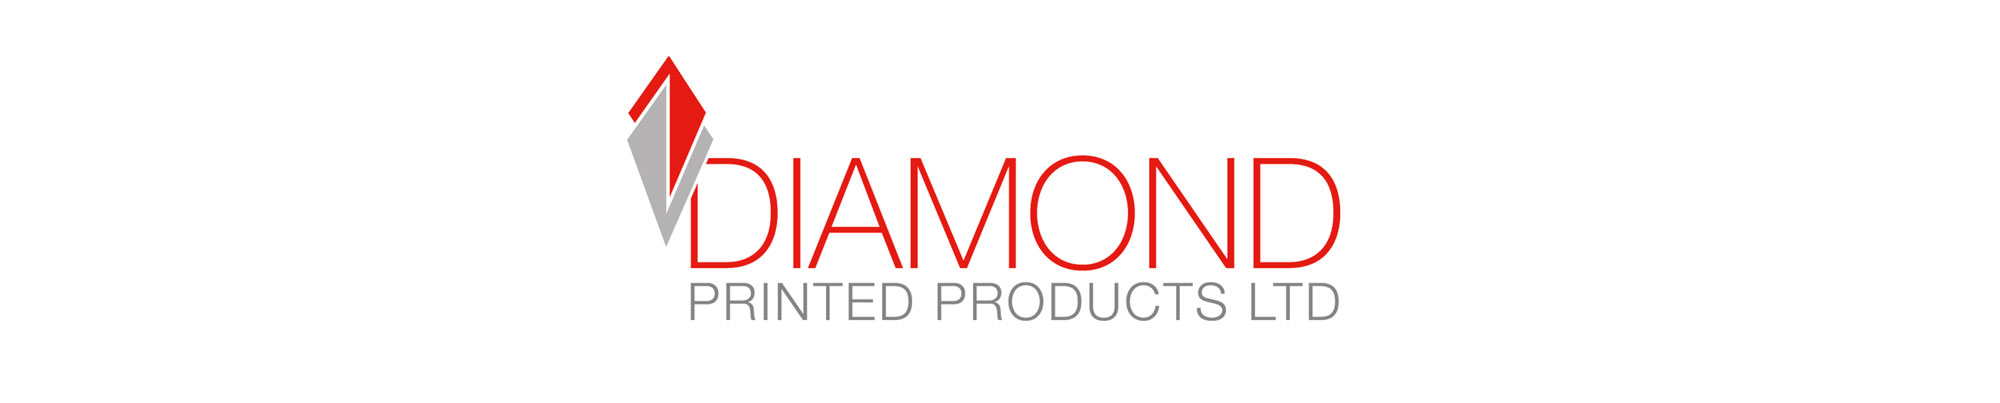 Diamond-Printed-Products-Banner-2